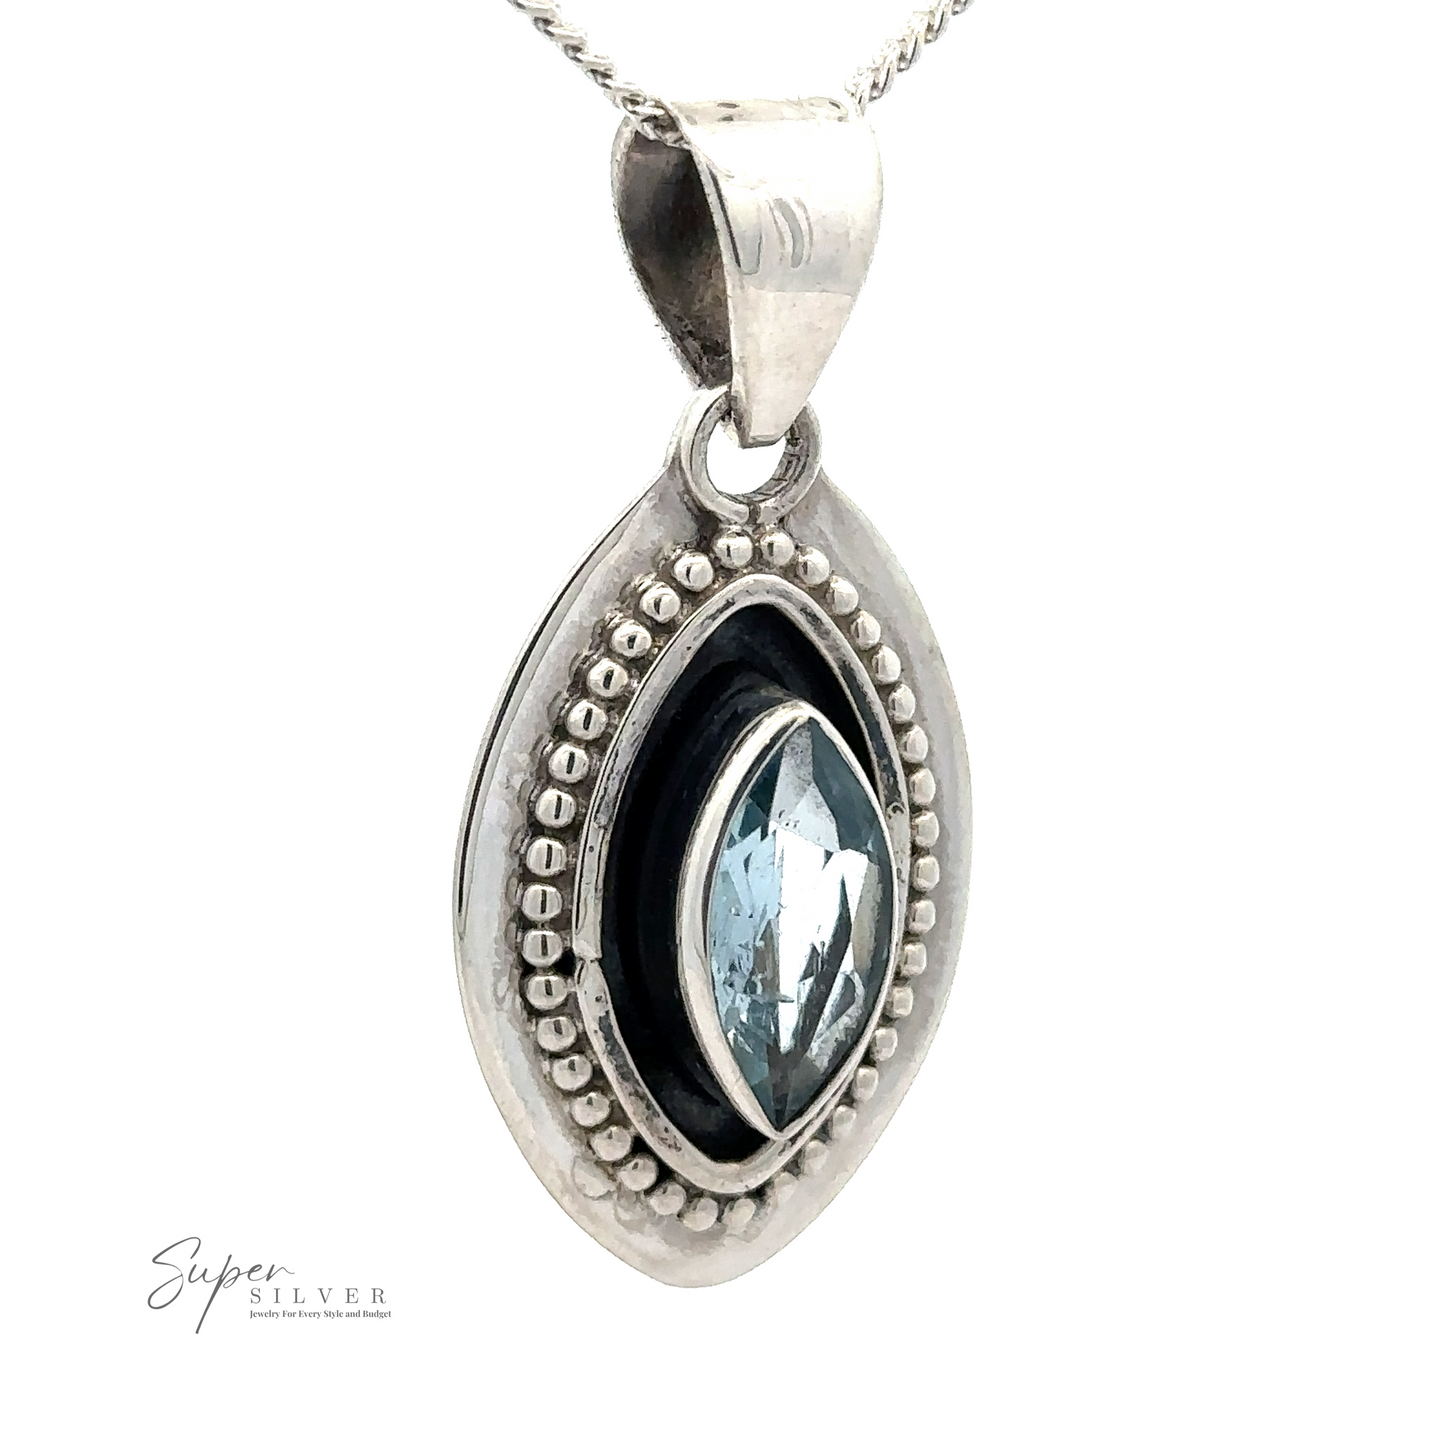 A Beautiful Marquise Pendant With Beaded Design featuring an oval-shaped blue gemstone set within a beaded design, with the text "Super Silver" visible in the corner.